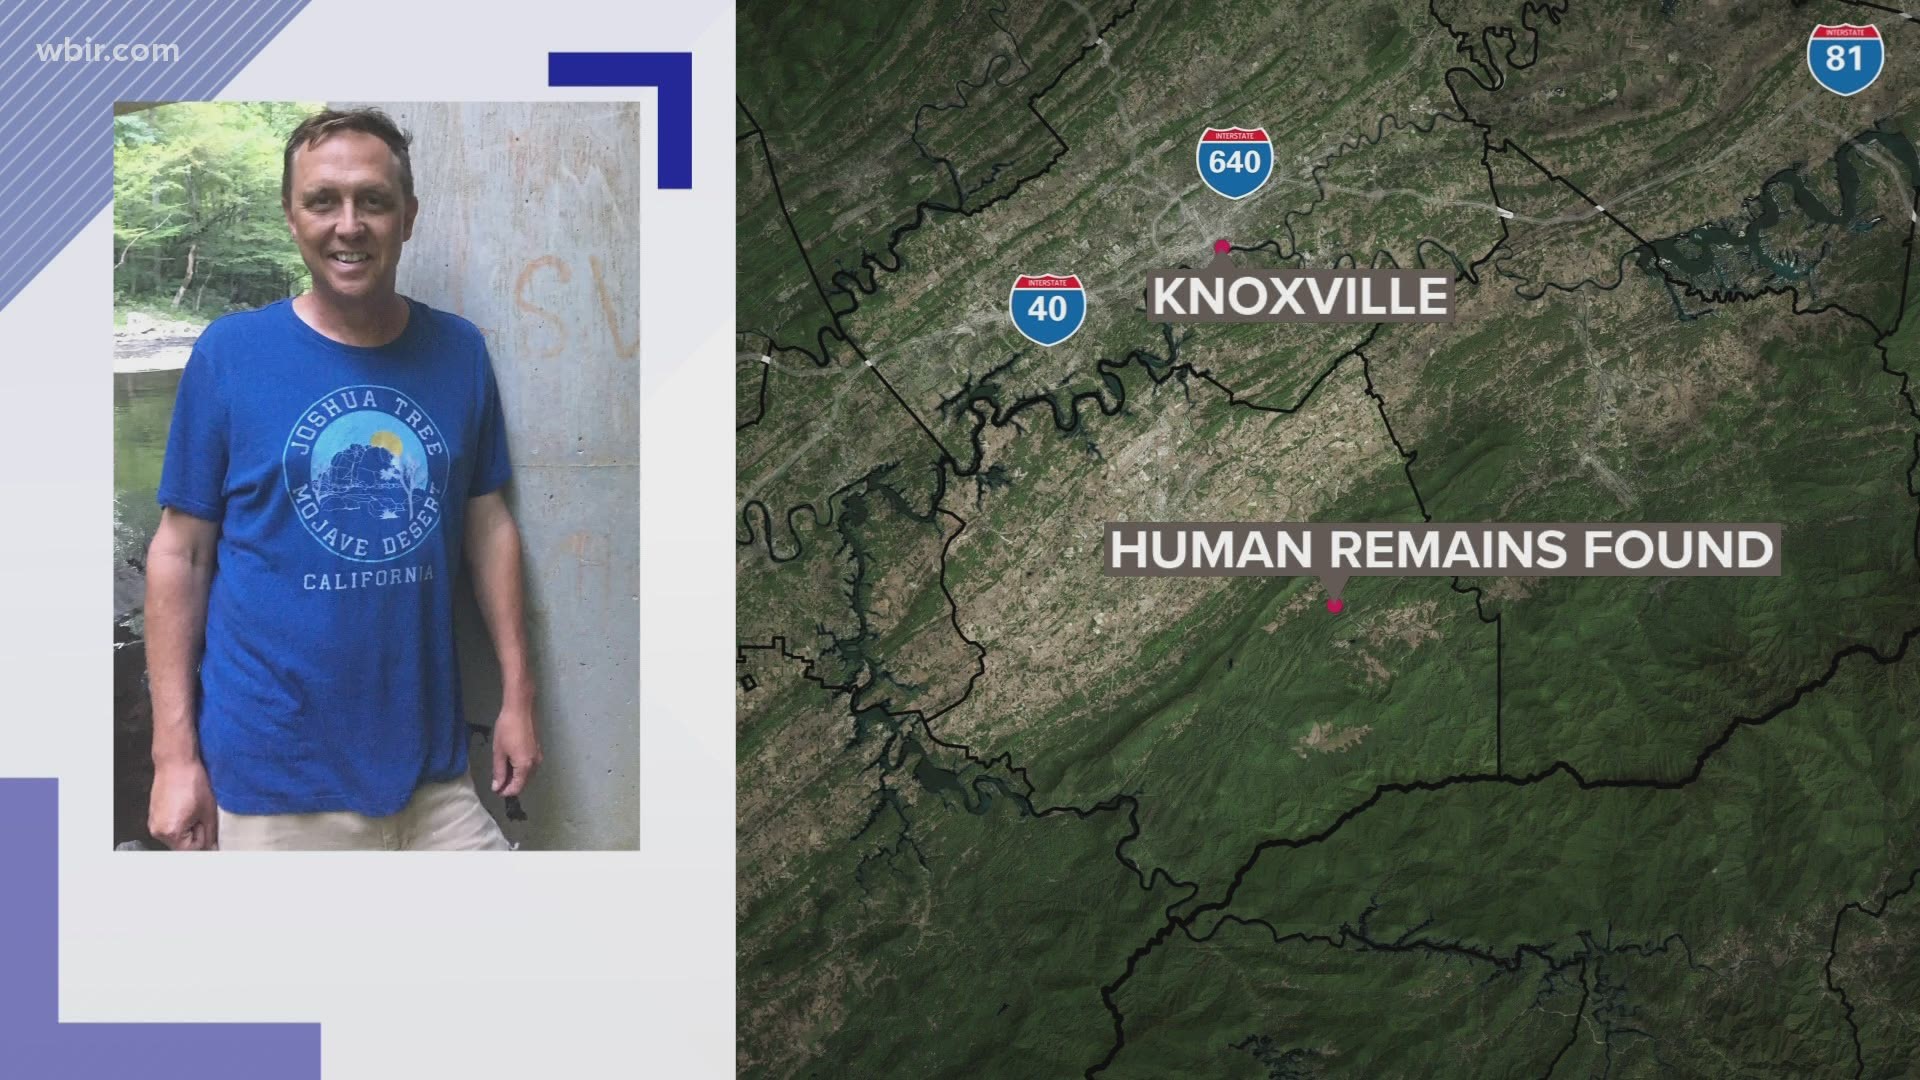 Blount County Sheriff's Office deputies and the Tennessee Wildlife Resources Agency are investigating after finding black bears near human remains.